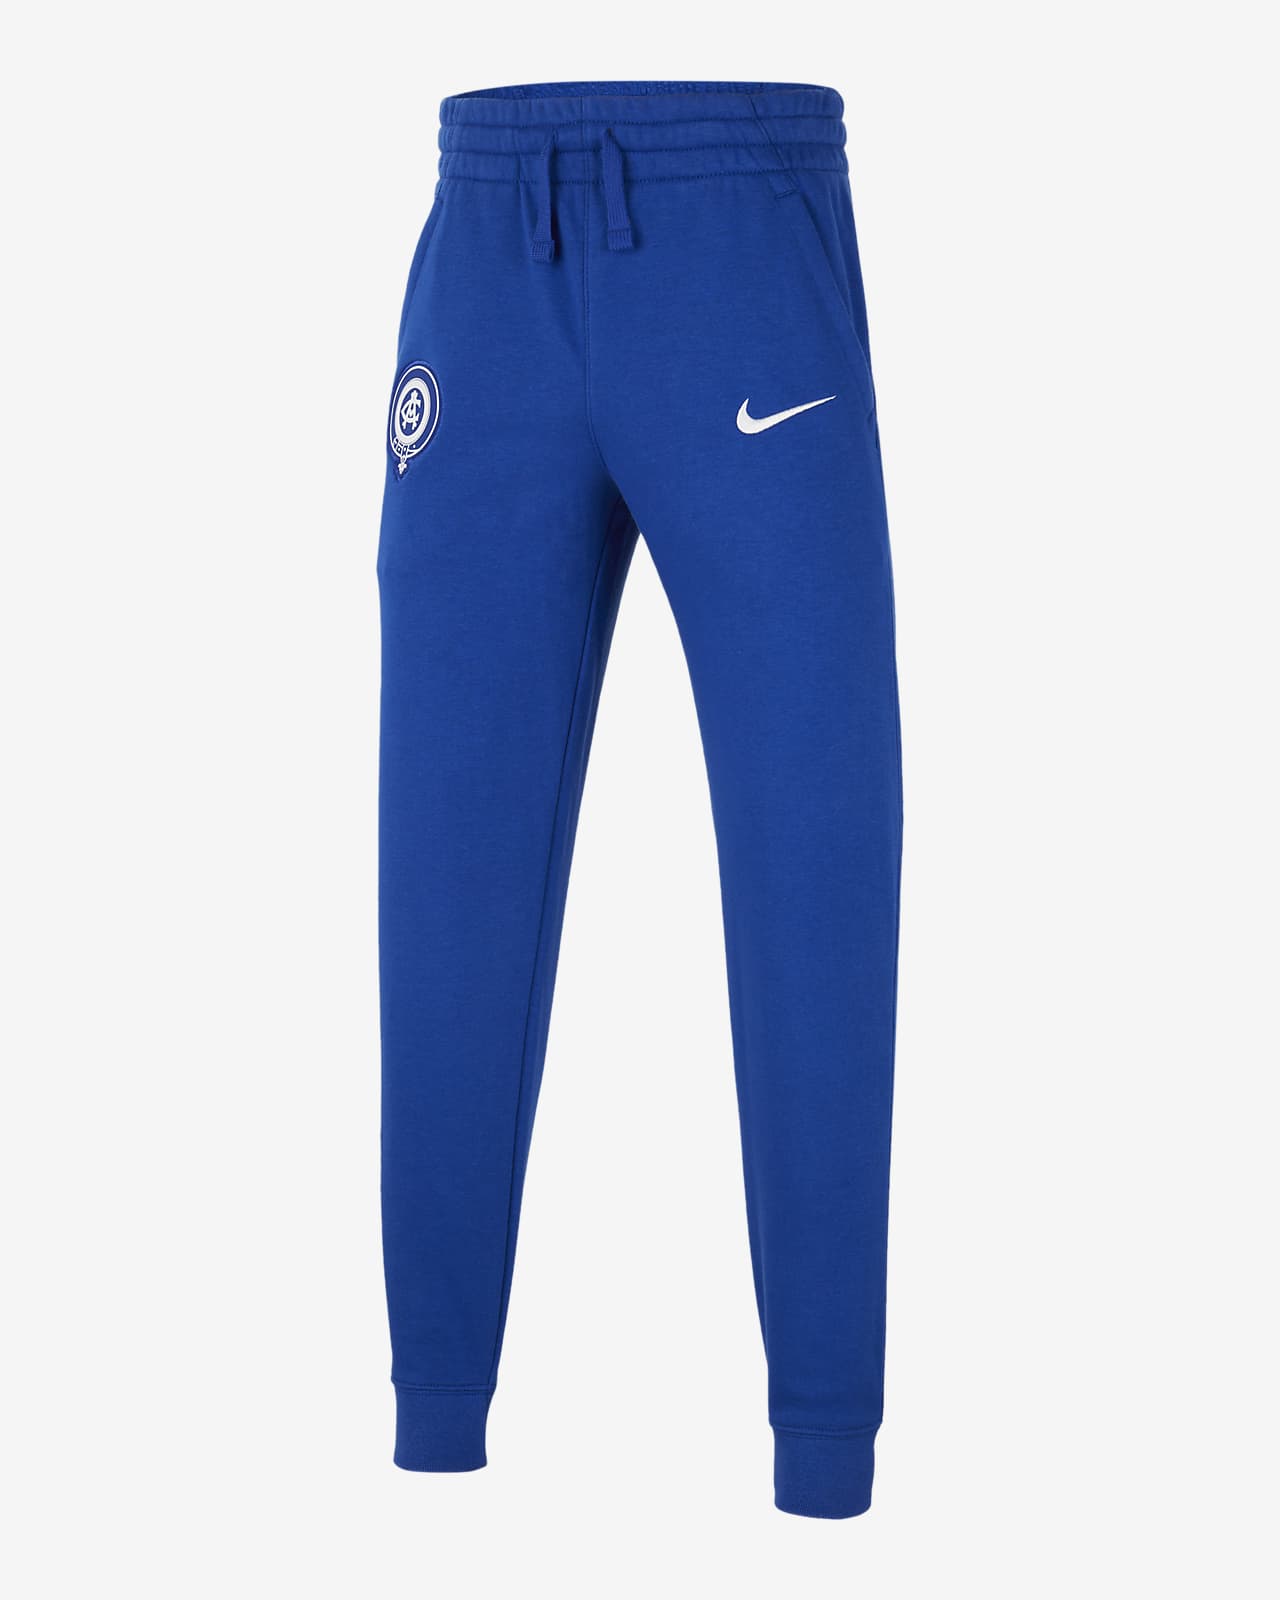 Atlético Madrid Older Kids' (Boys') French Terry Joggers